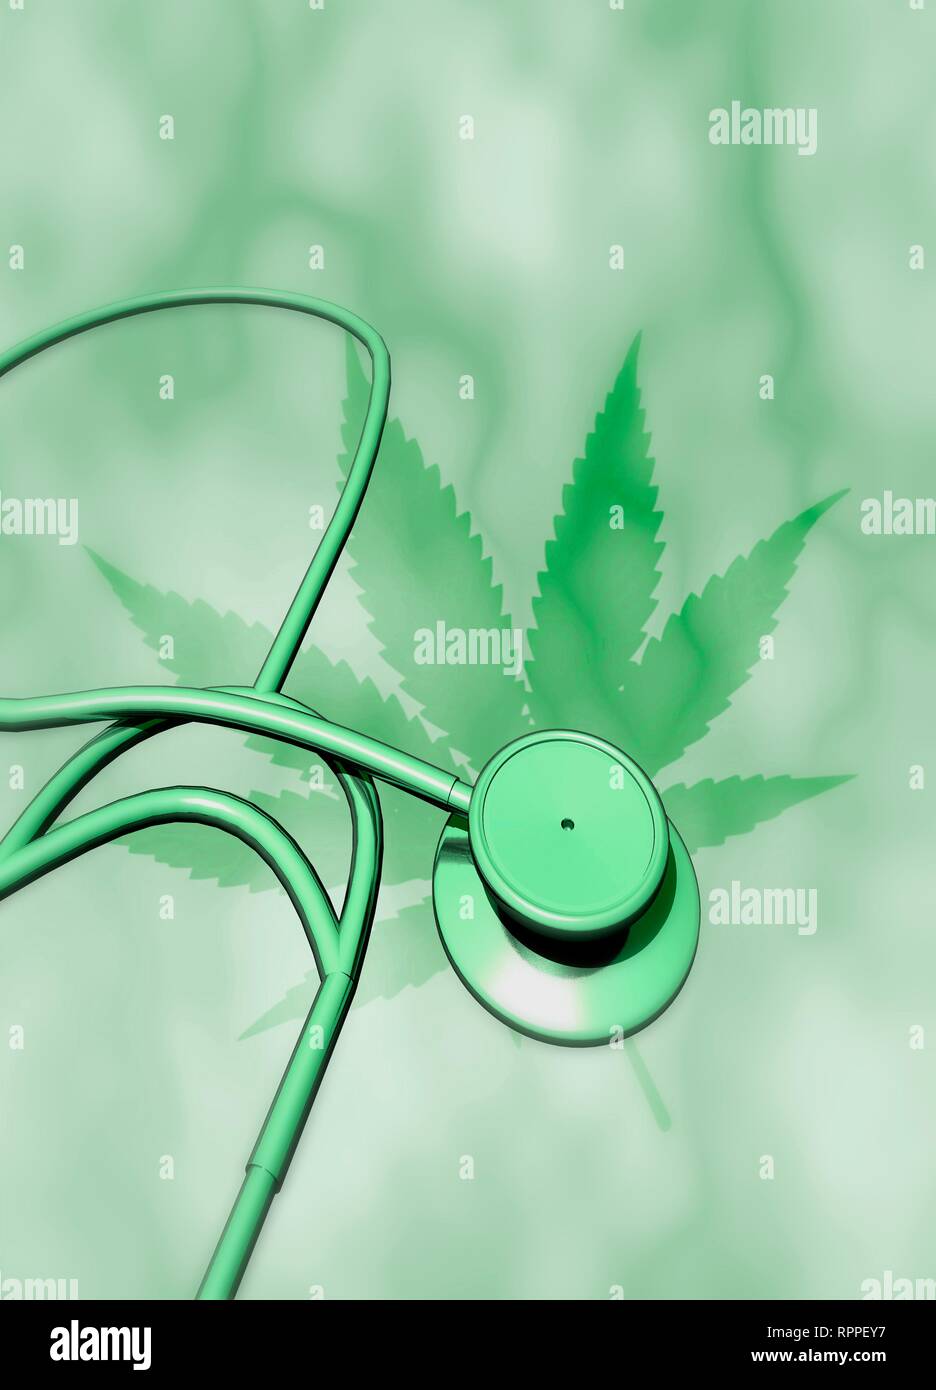 Medical cannabis, conceptual image. Leaf of the cannabis plant (Cannabis sativa) with stethoscope. Cannabis (also known as marijuana) contains the psychoactive chemical tetrahydrocannabinol (THC). It is medically useful because of its ability to relieve pain, increase appetite and control muscle spasms. Cannabis has the potential to treat the side-effects of chemotherapy and the symptoms of conditions including AIDS, multiple sclerosis and chronic pain from nerve damage. Stock Photo